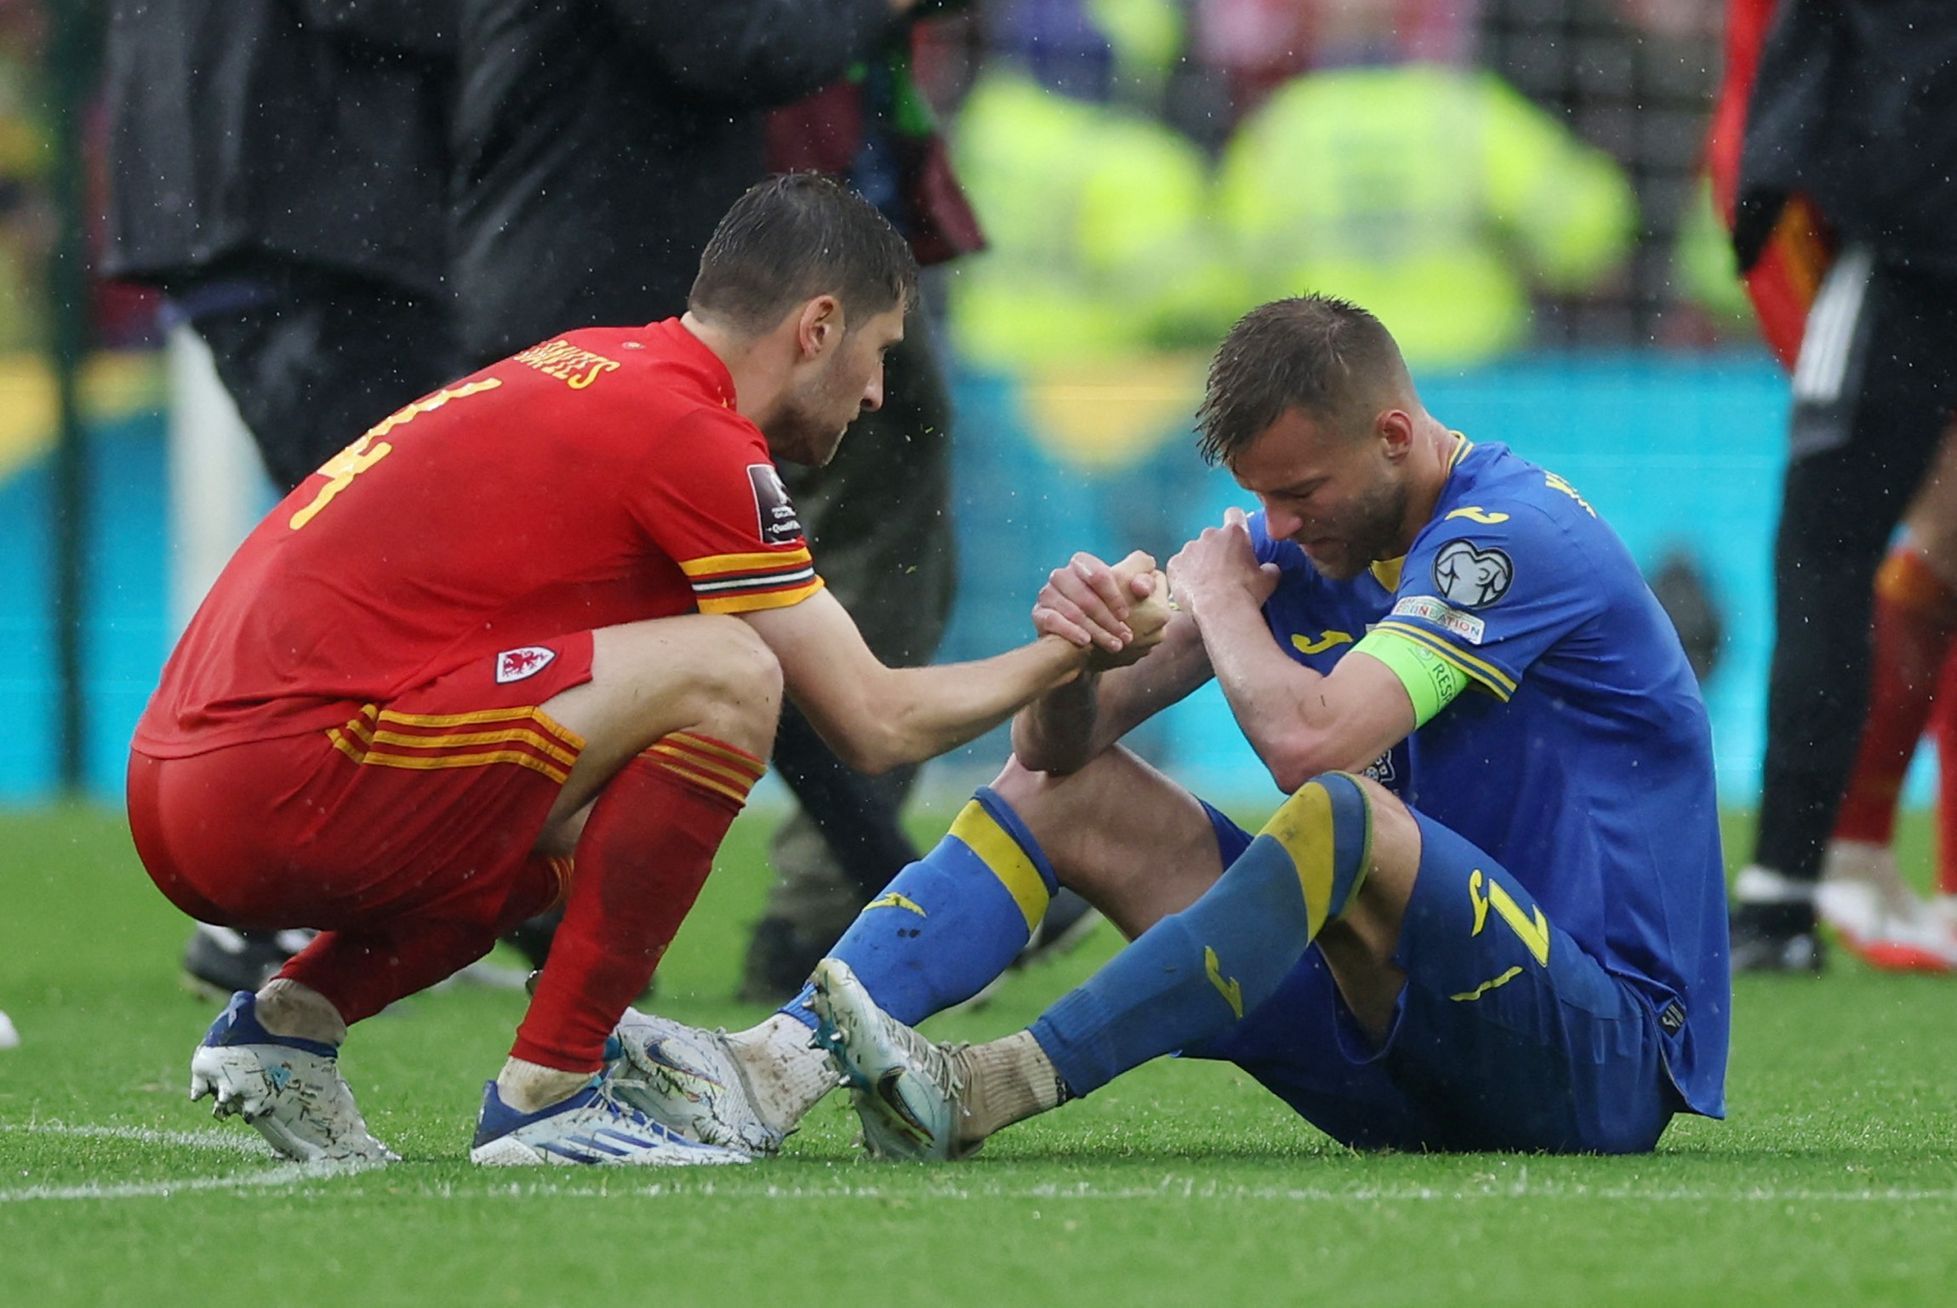 Wales are taking part in the World Cup for the first time since 1958. Ukraine were beaten by Yarmolenko’s own goal